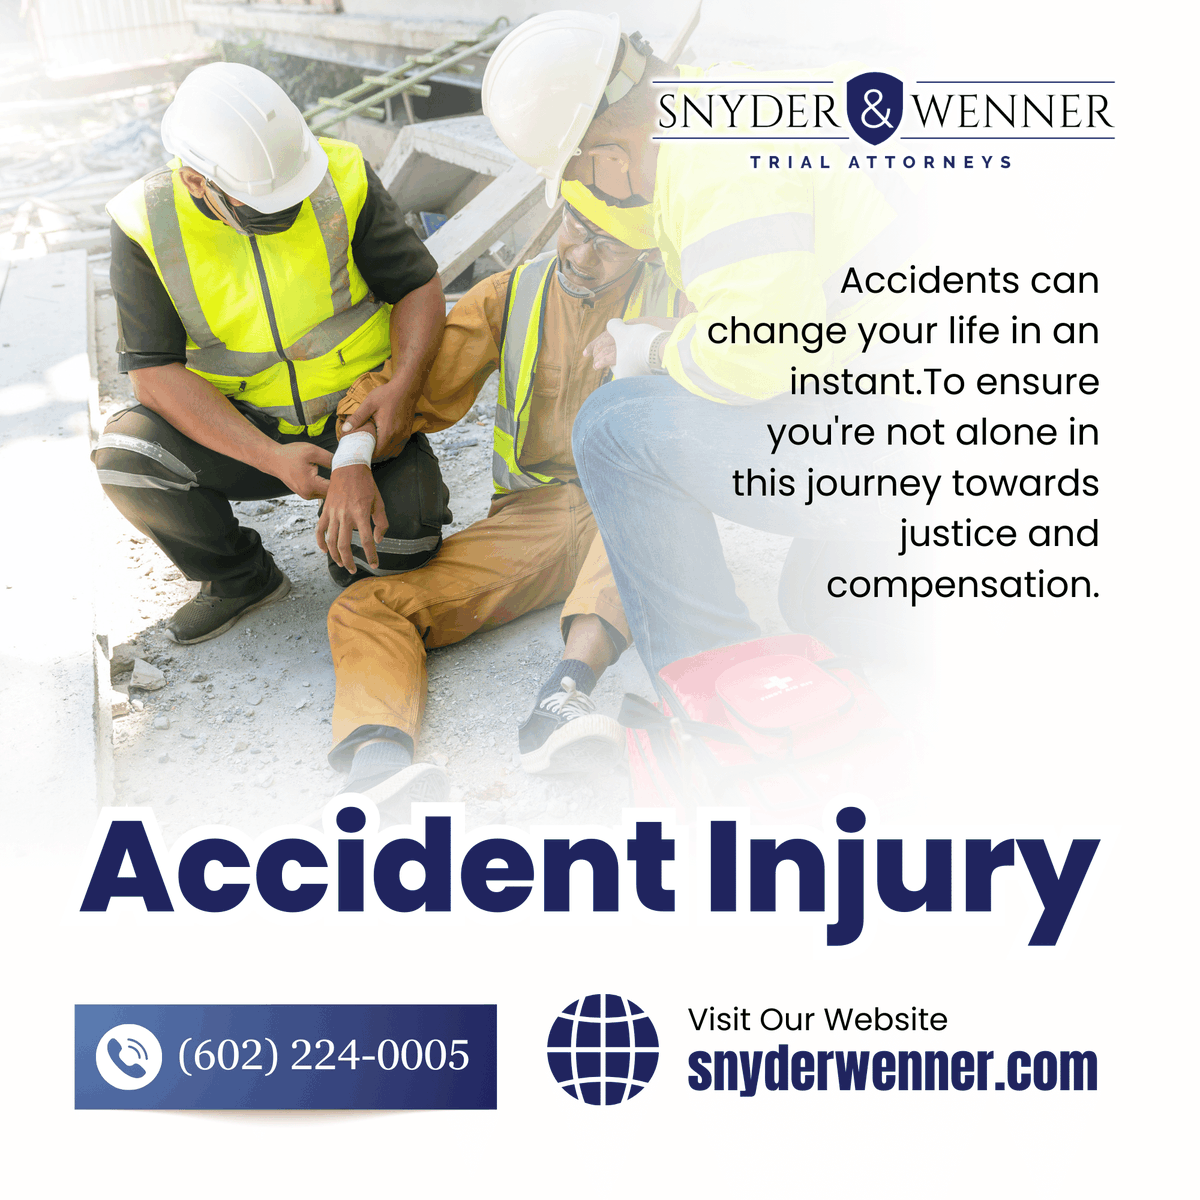 Accidents can change your life in an instant. Snyder & Wenner, P.C. is here to ensure you're not alone in this journey towards justice and compensation. 🚗💔 #AccidentInjury #JusticeForYou #SnyderWenner More at snyderwenner.com.